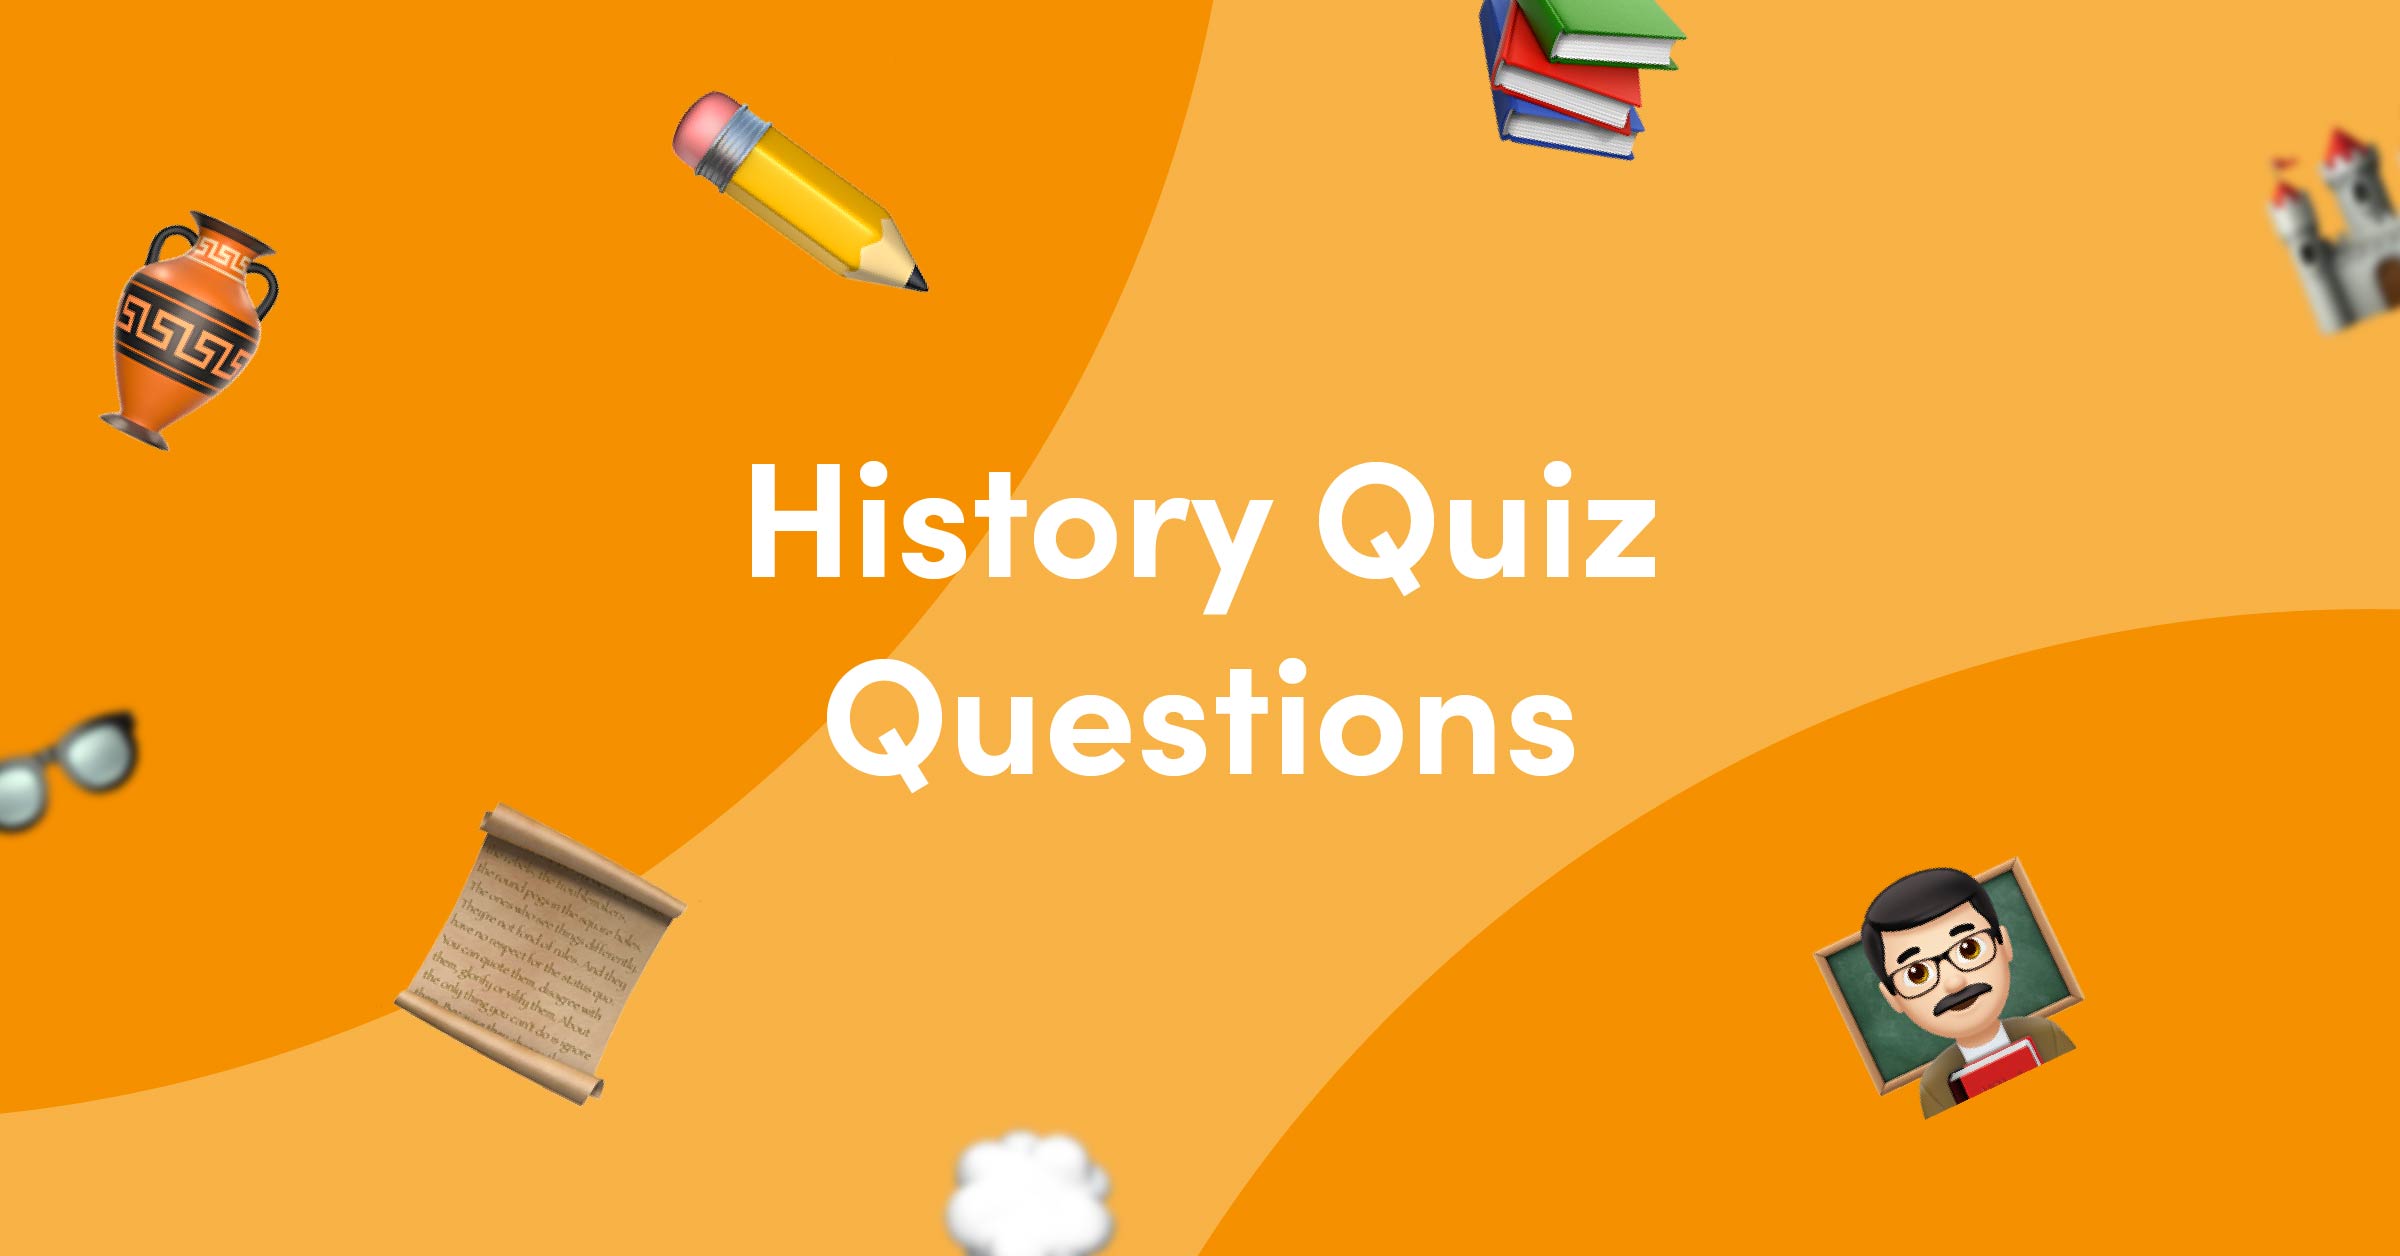 Emojis on orange background for history quiz questions and answer